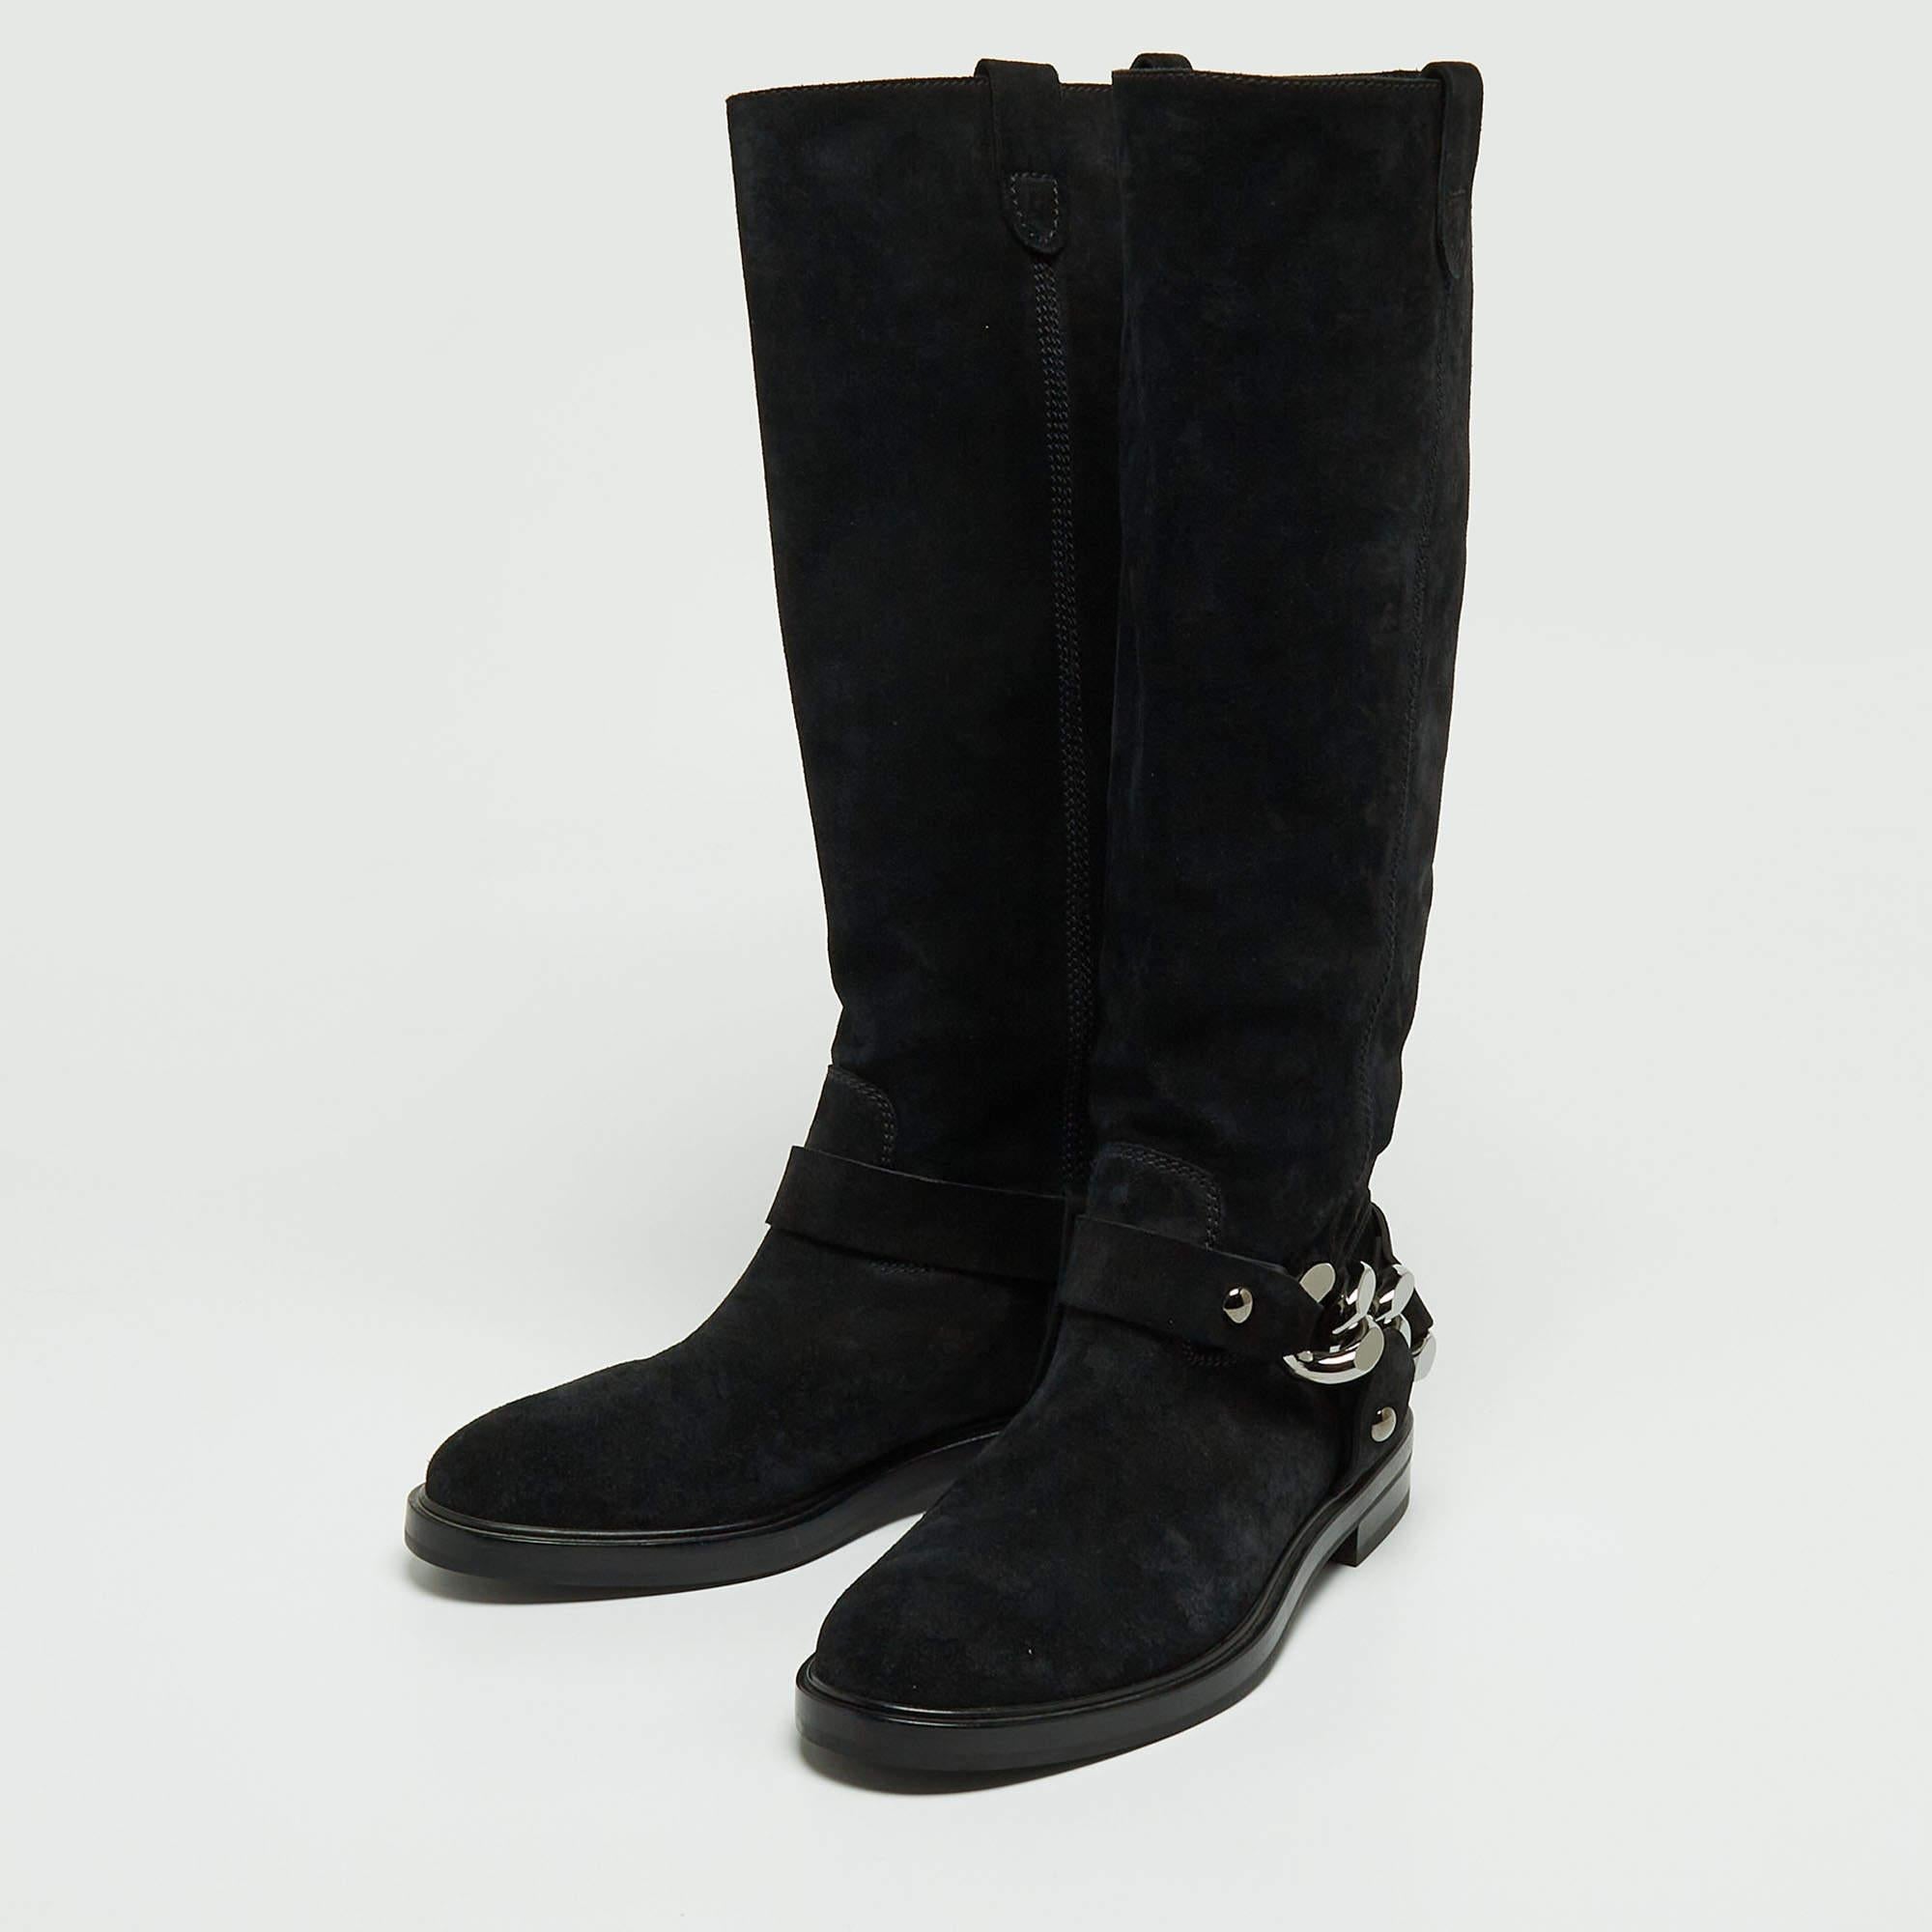 Casadei Black Suede Knee Length Boots Size 38.5 For Sale 4